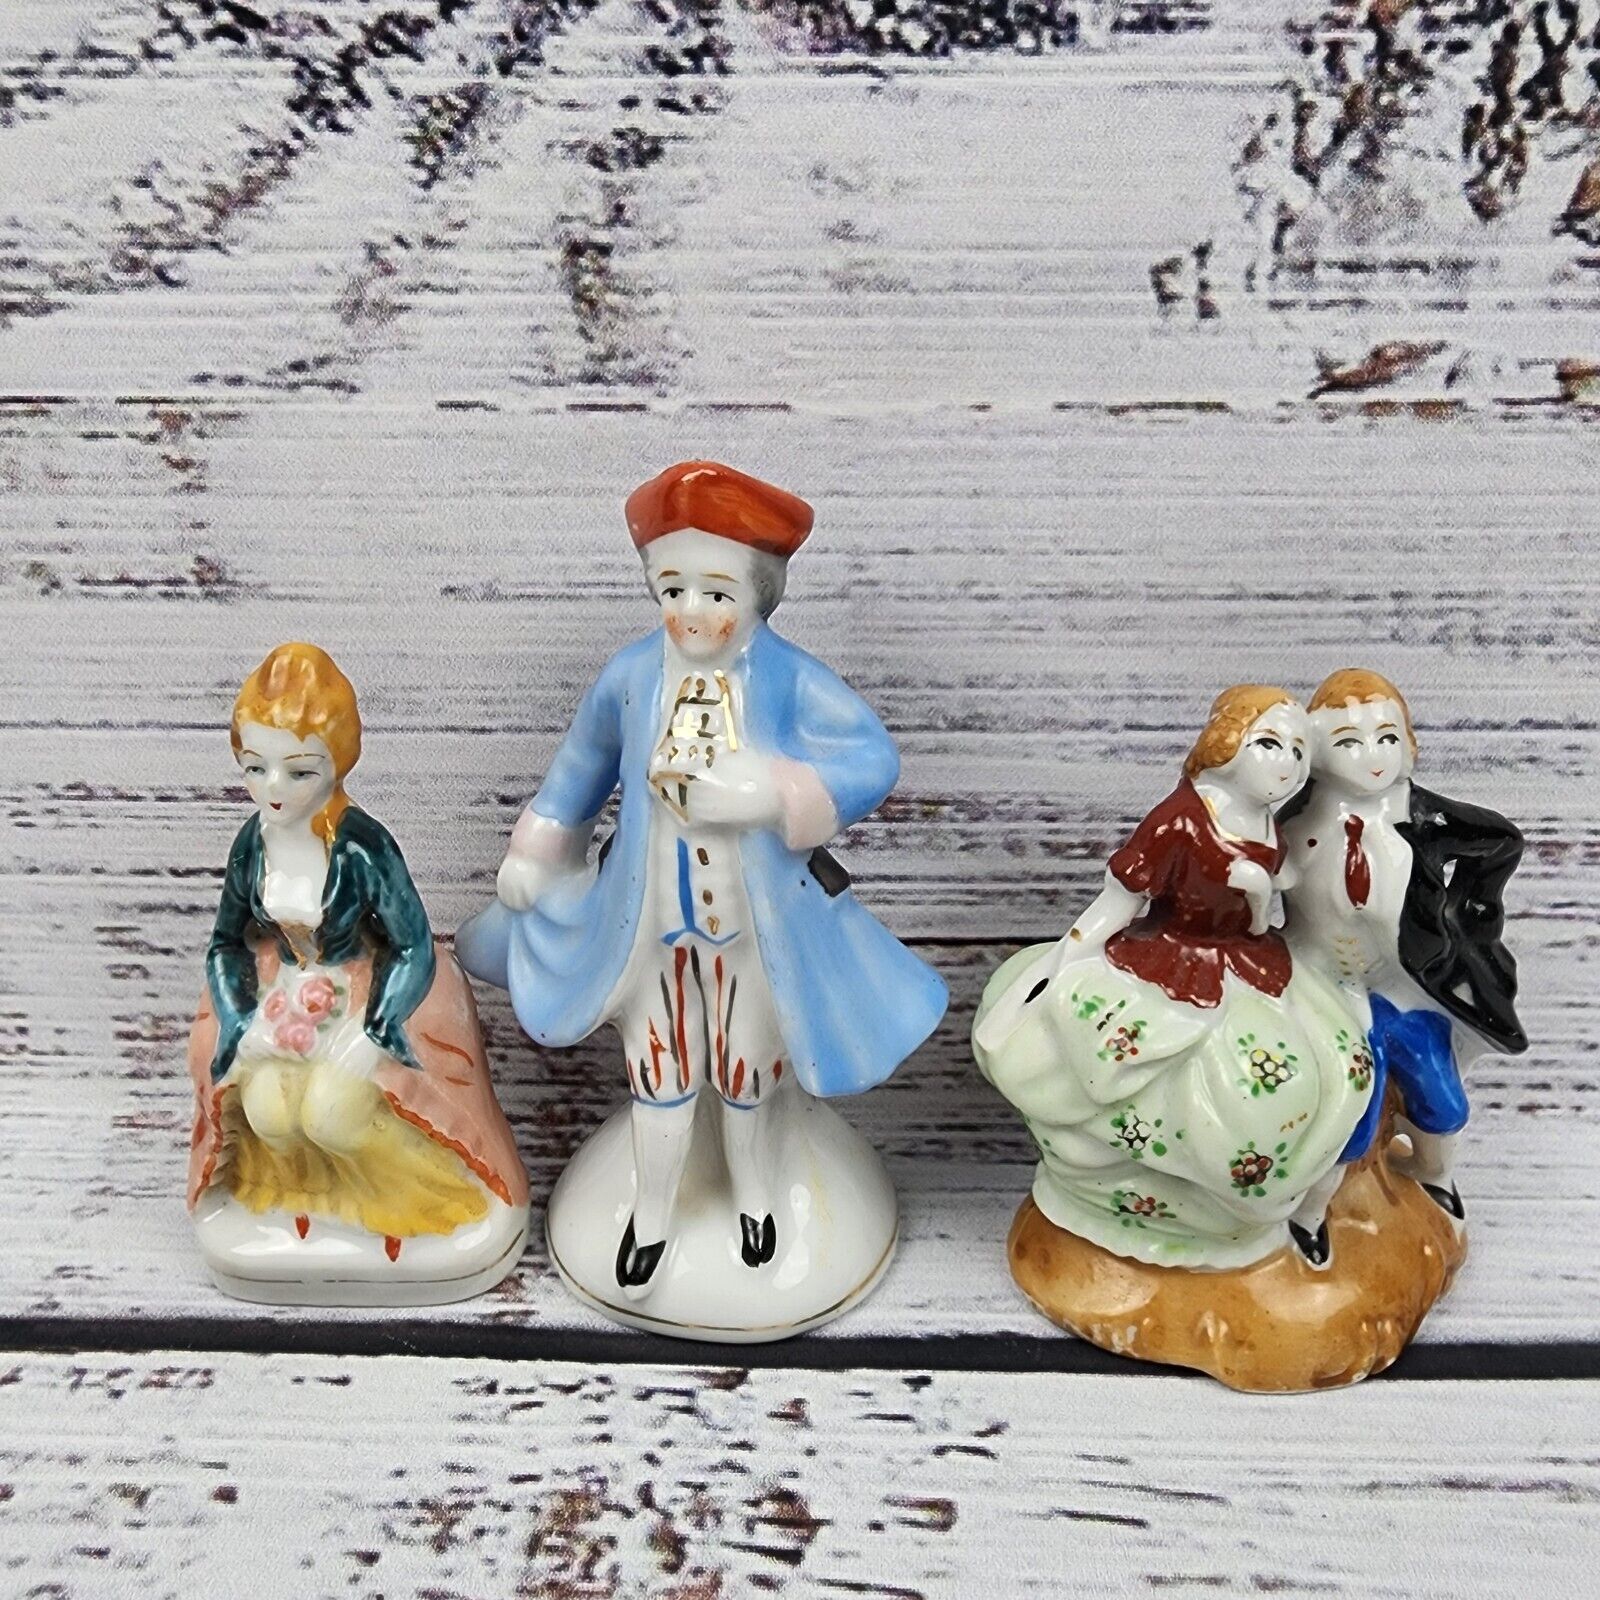 Vintage Made in Occupied Japan Porcelain Courting  Dancing Couple Figurines 3pc